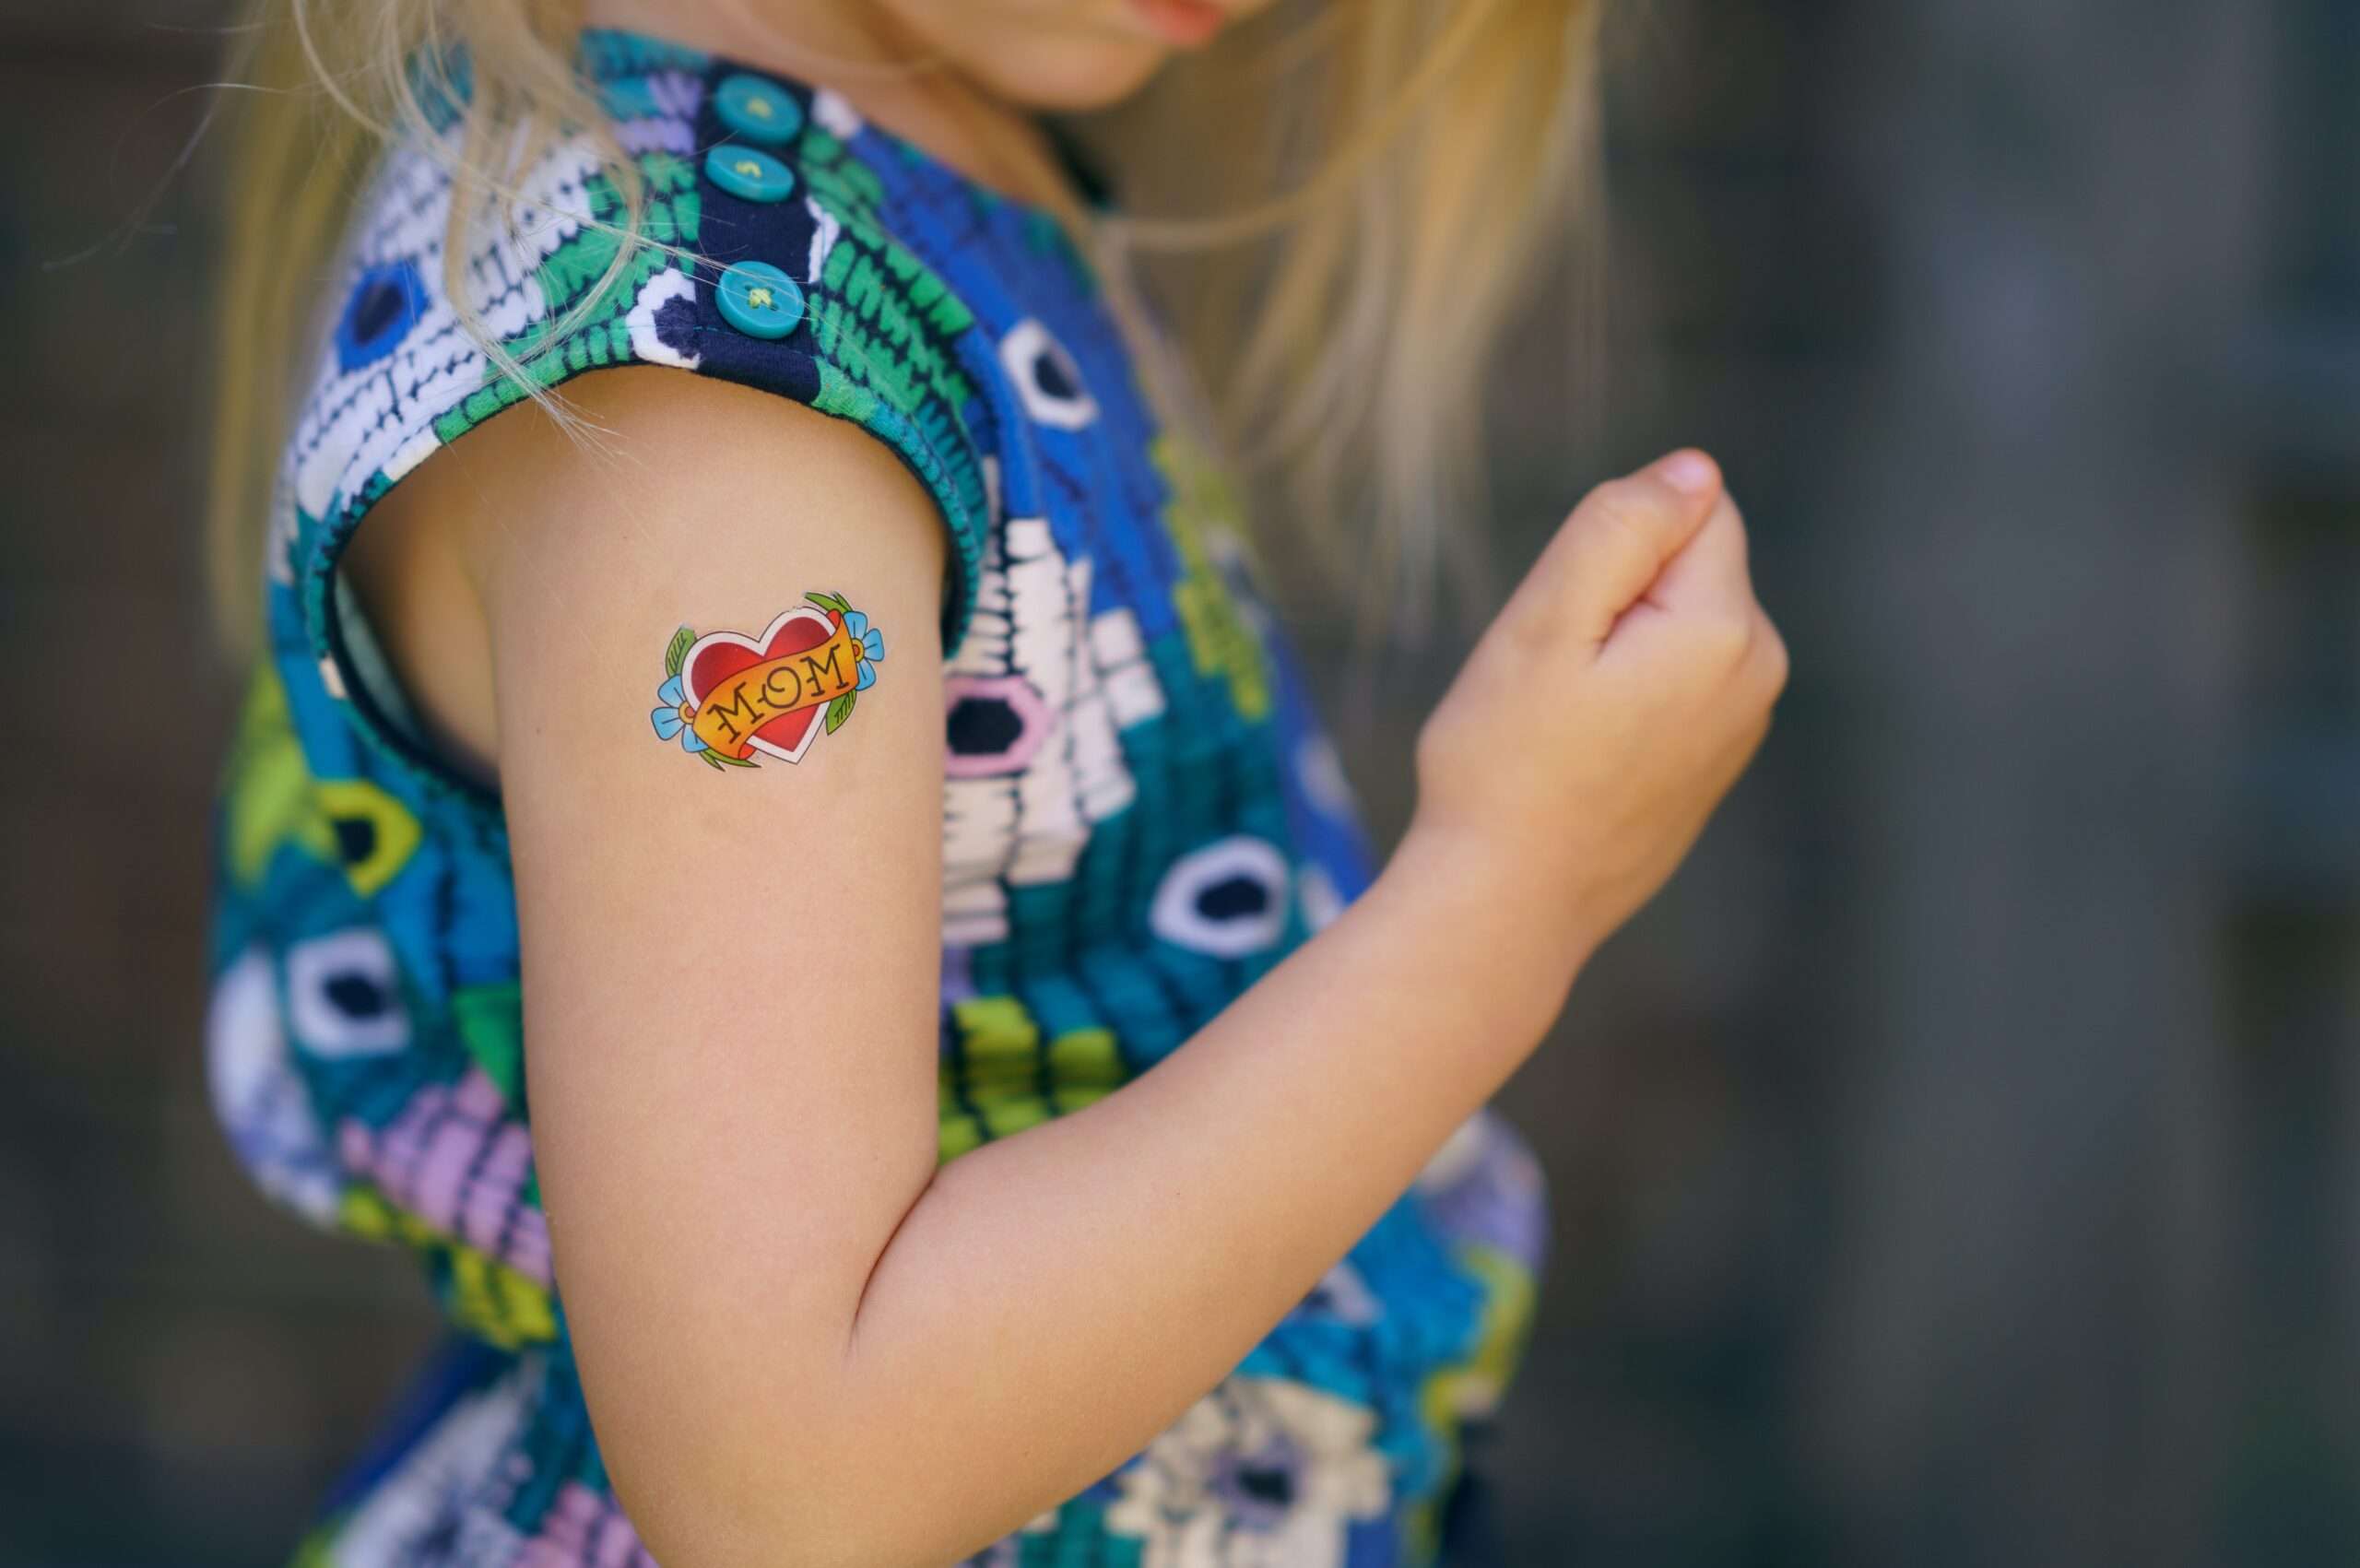 Parents Face Criminal Charges Over Children's Tattoos